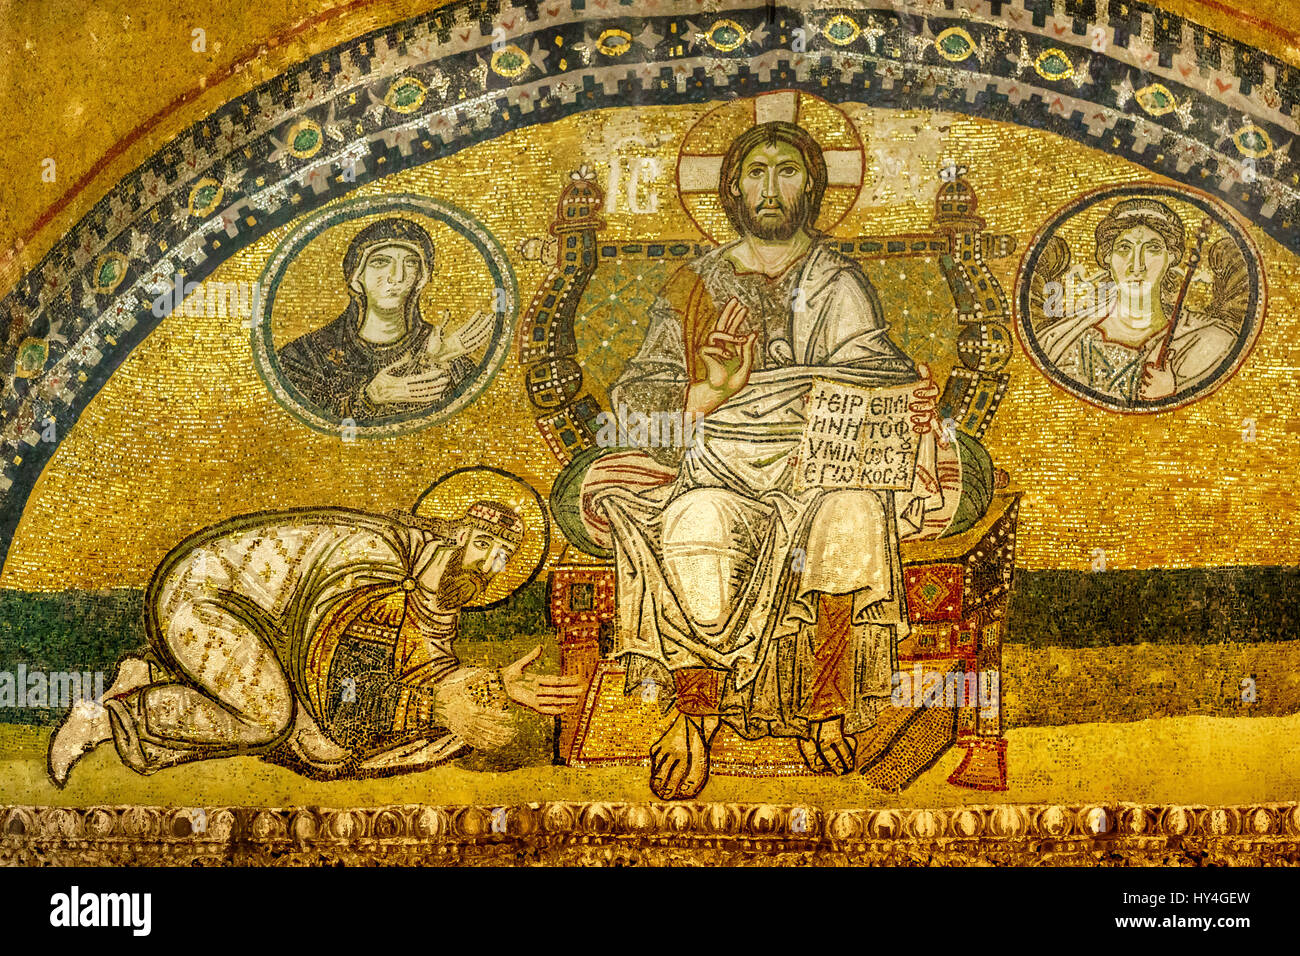 Hagia sofia. Mosaic in the imperial port. The Emperor kneels to Christ Pantokrator. In the book: Peace be with you, I am the light. Stock Photo